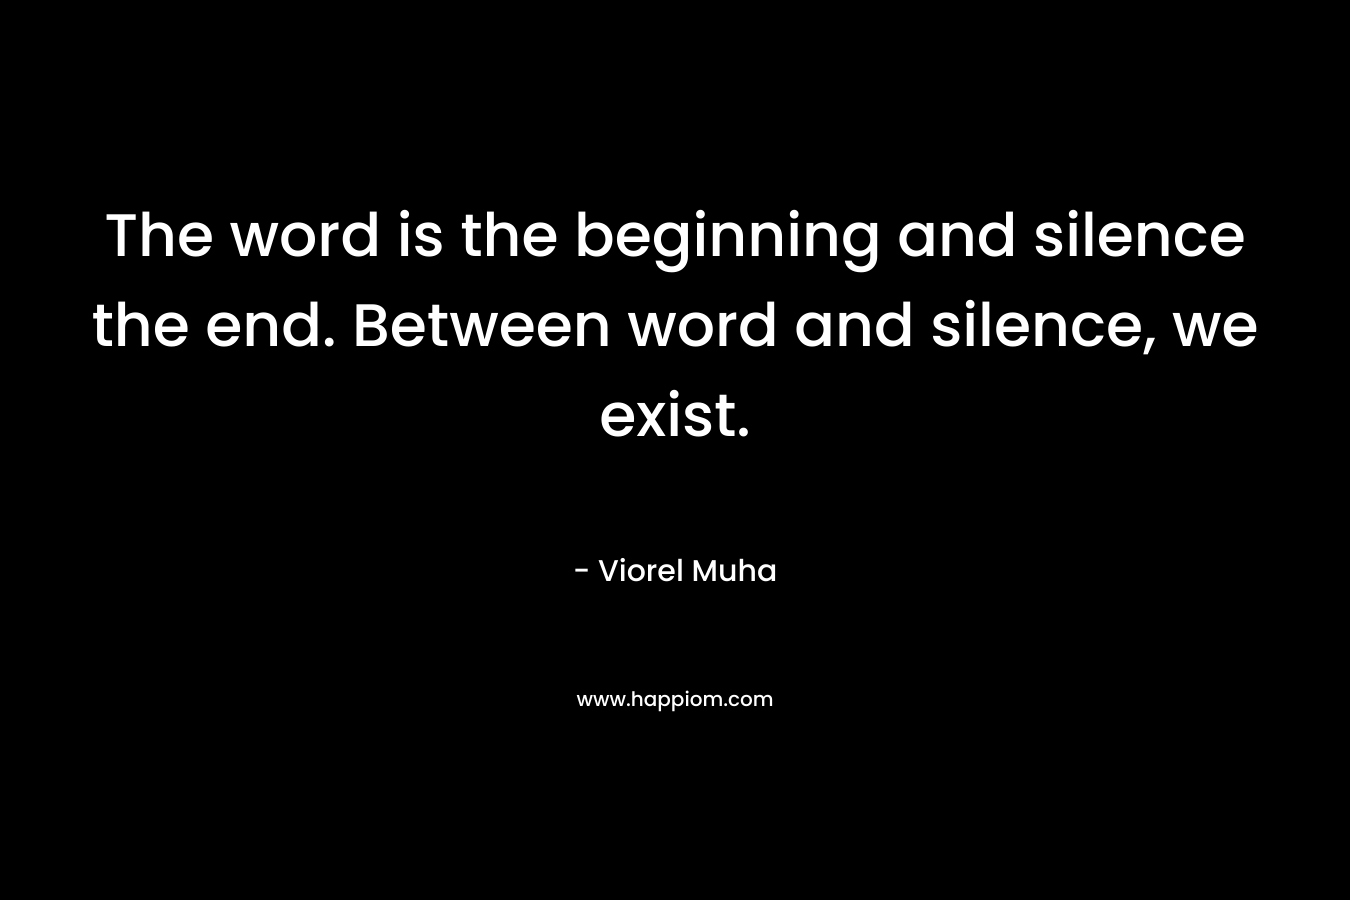 The word is the beginning and silence the end. Between word and silence, we exist. – Viorel Muha